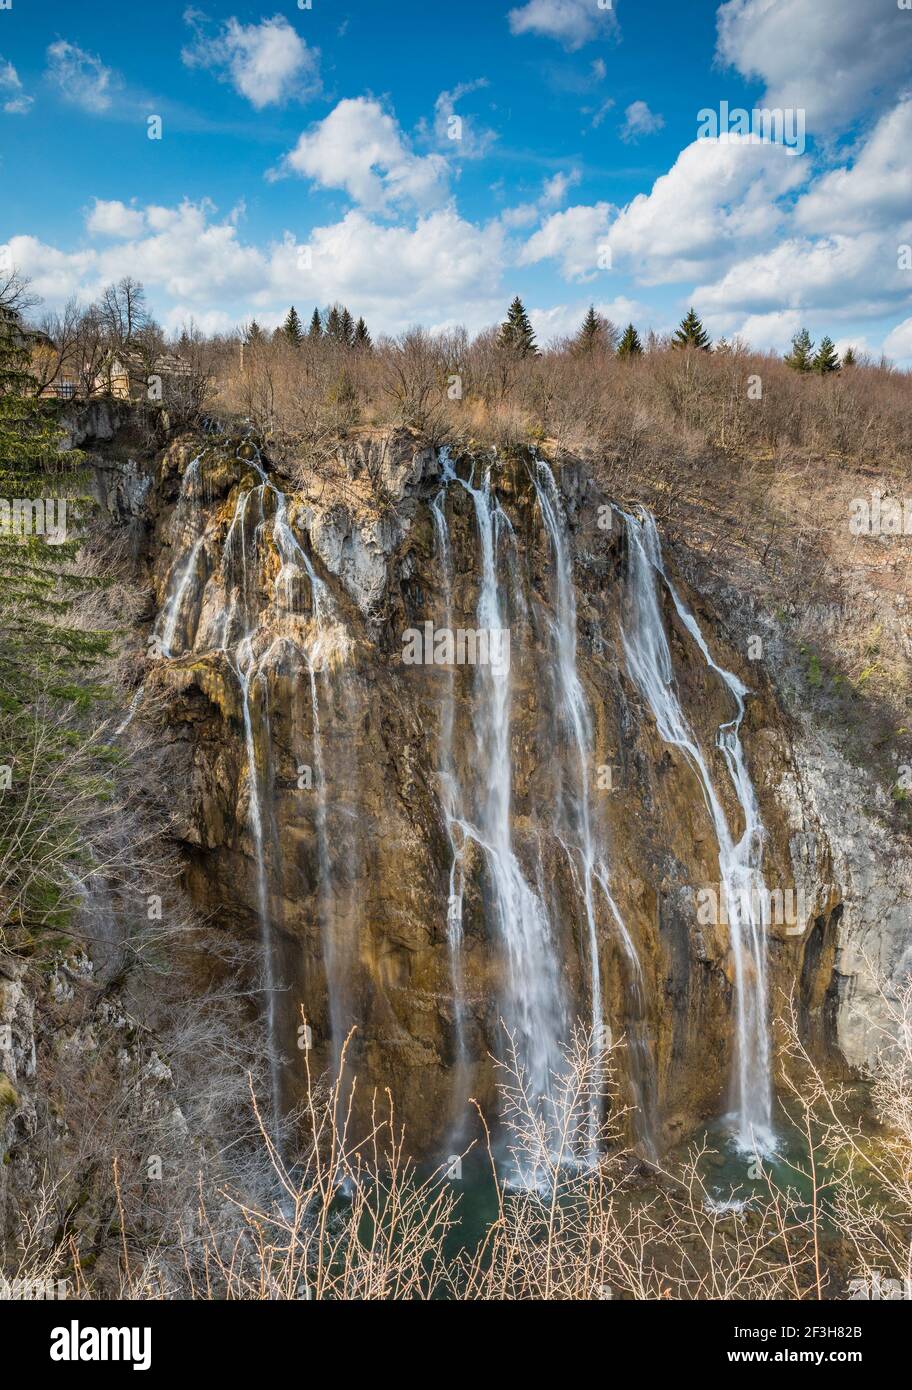 Big waterfall in National Park Plitvice Lakes Stock Photo